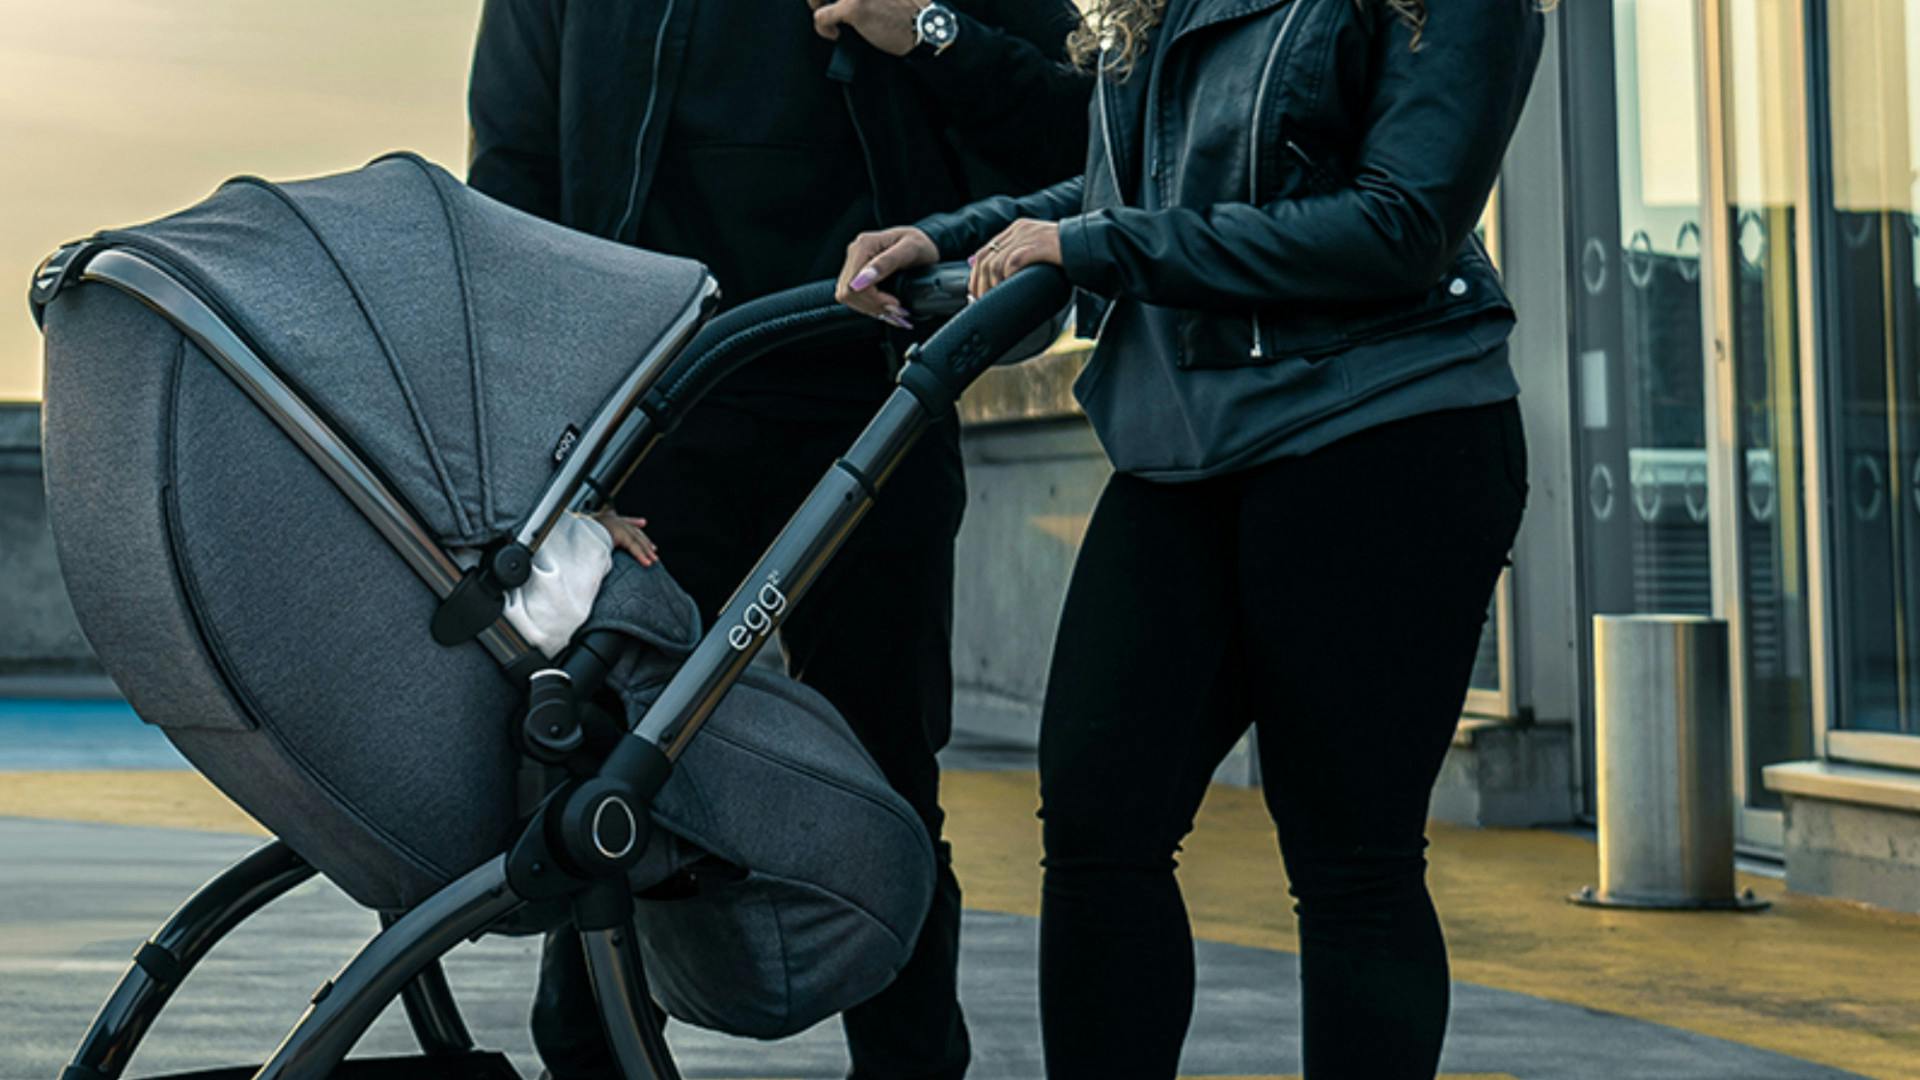 Your complete guide to the feature-packed Egg2 Stroller